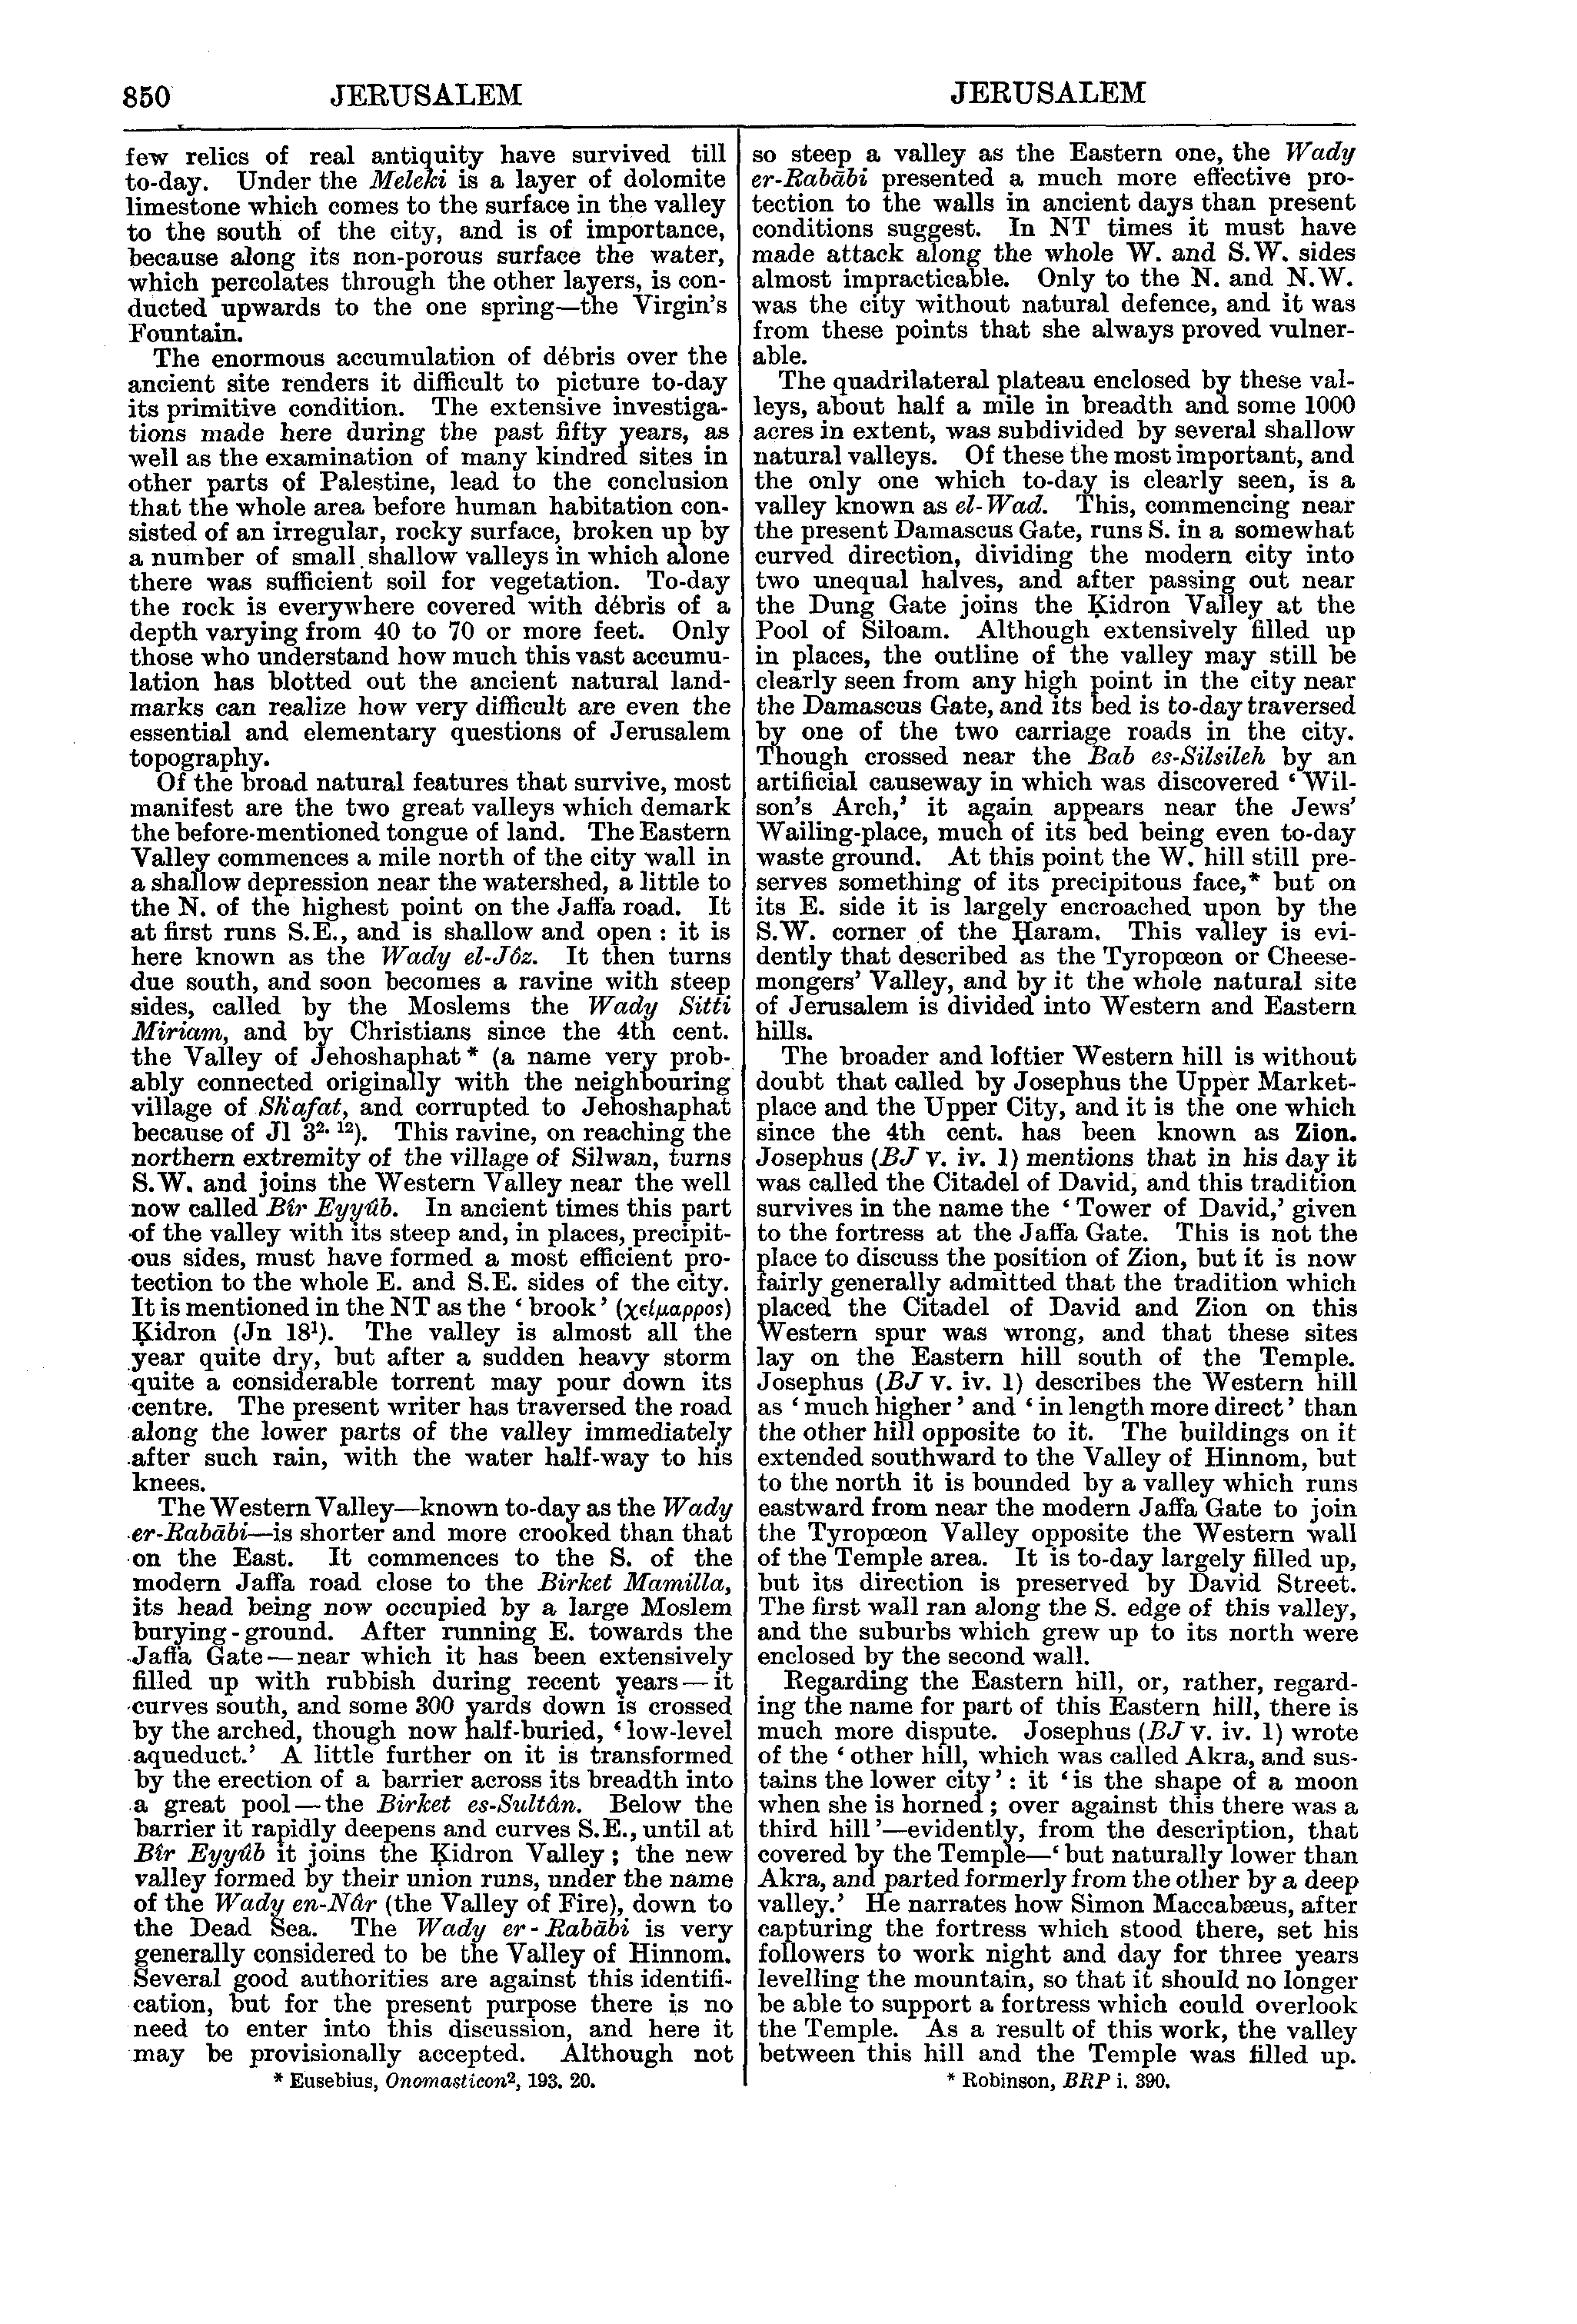 Image of page 850